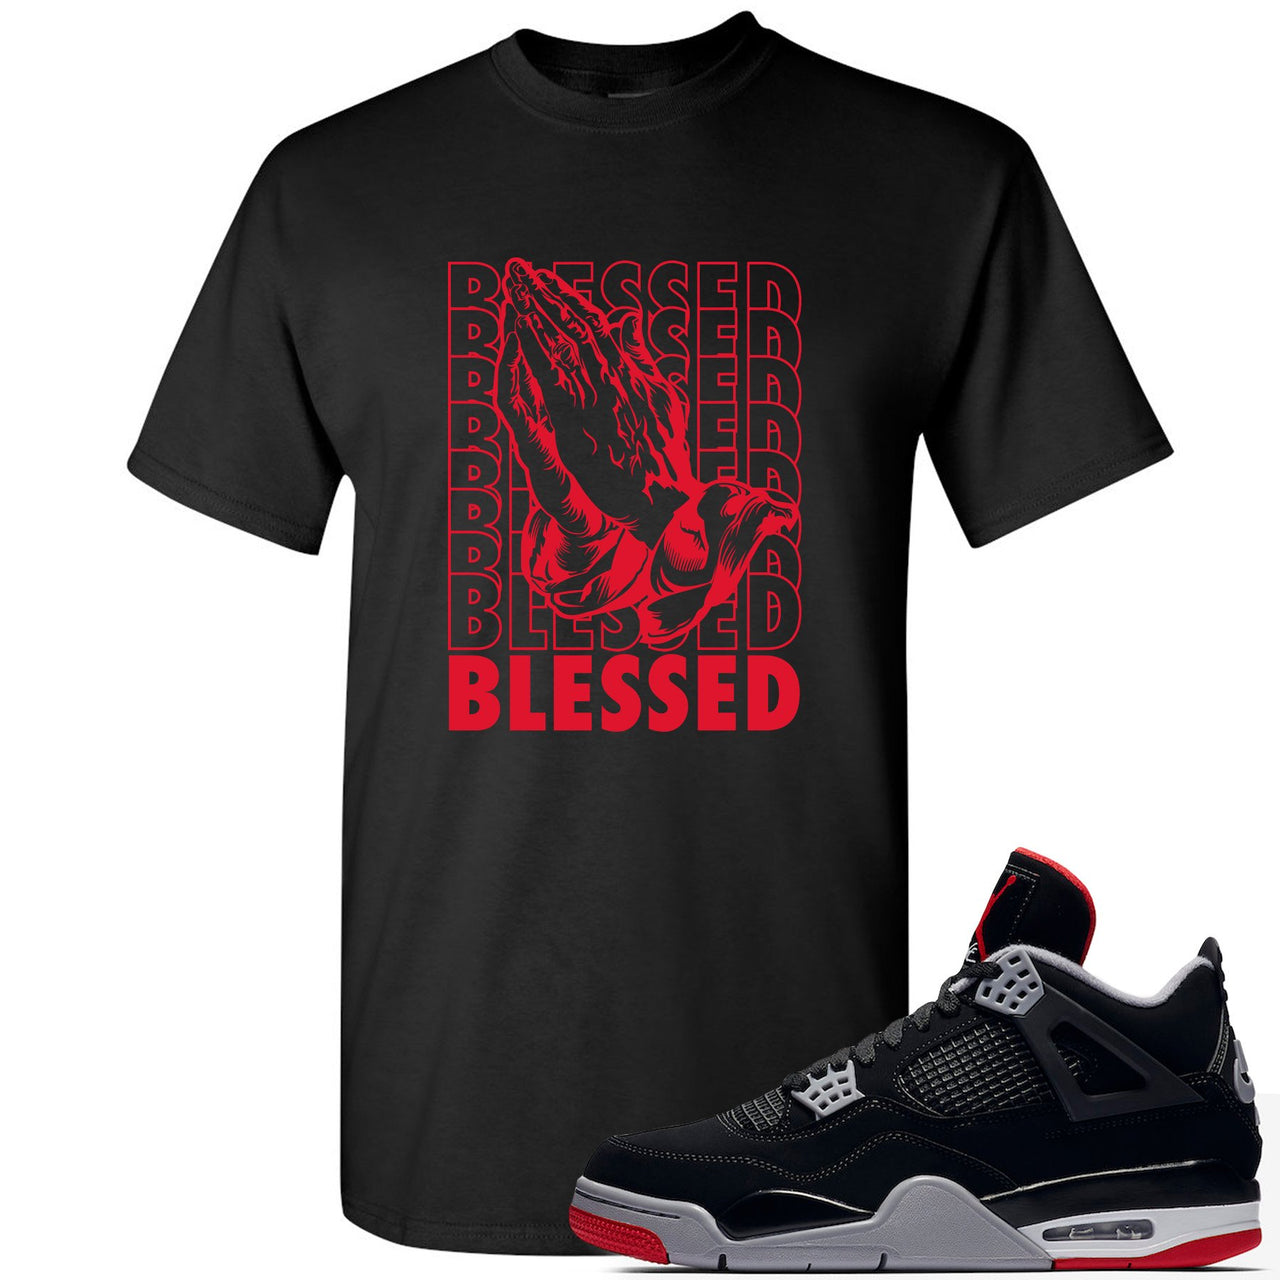 This black and red t-shirt will match great with your Air Jordan 4 Bred shoes